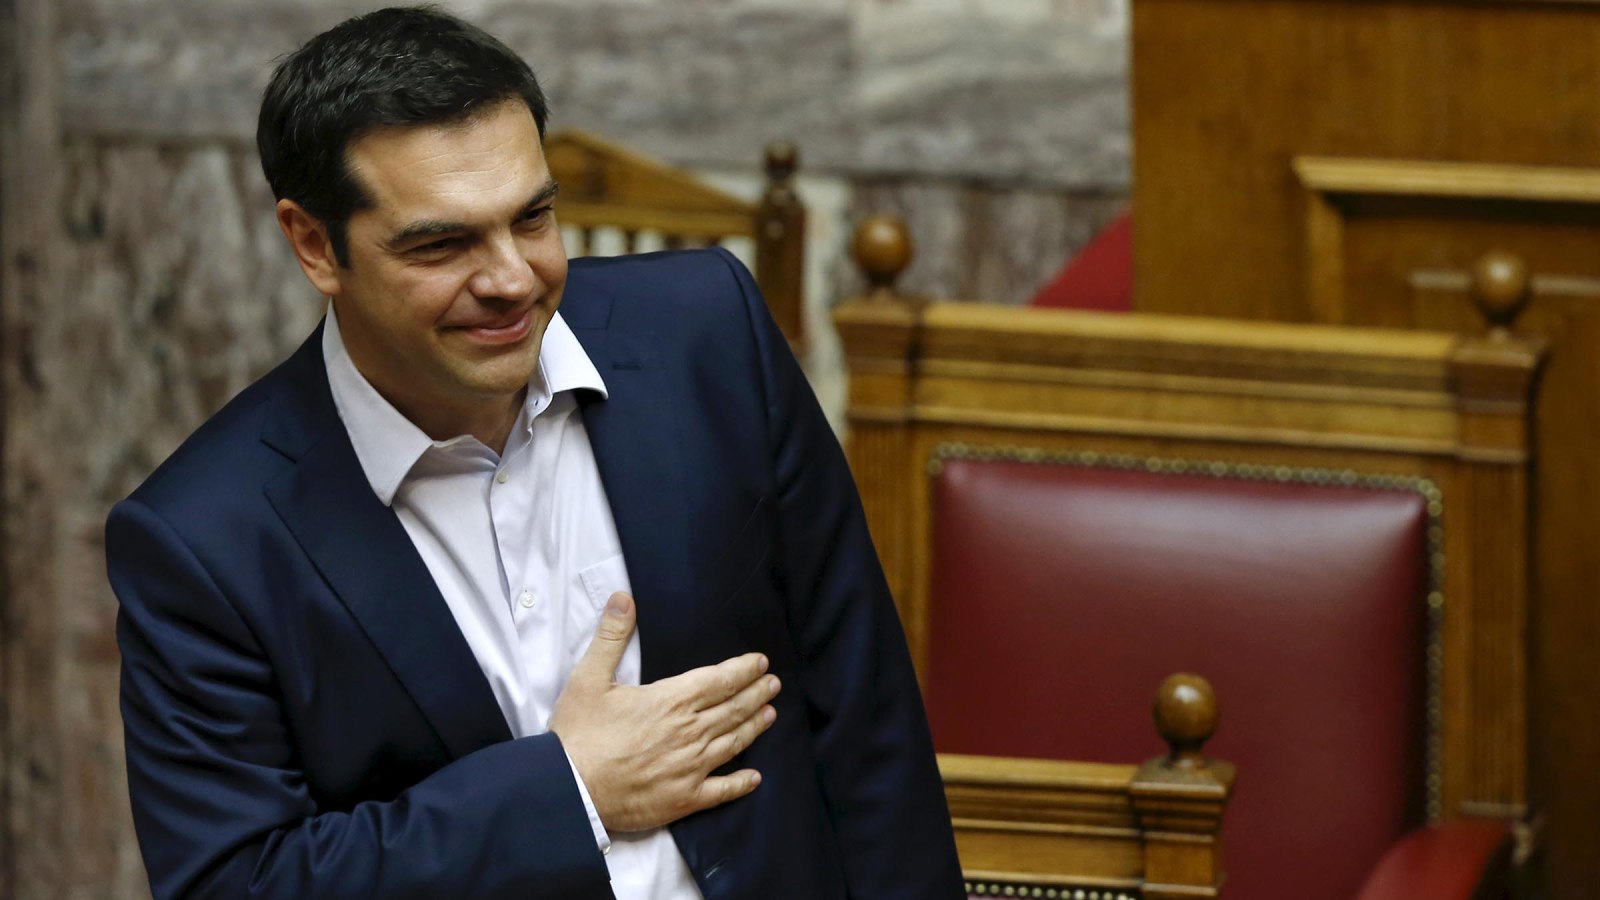 Greek PM Tsipras acknowledges applause by his party's lawmakers during a parliamentary session in Athens